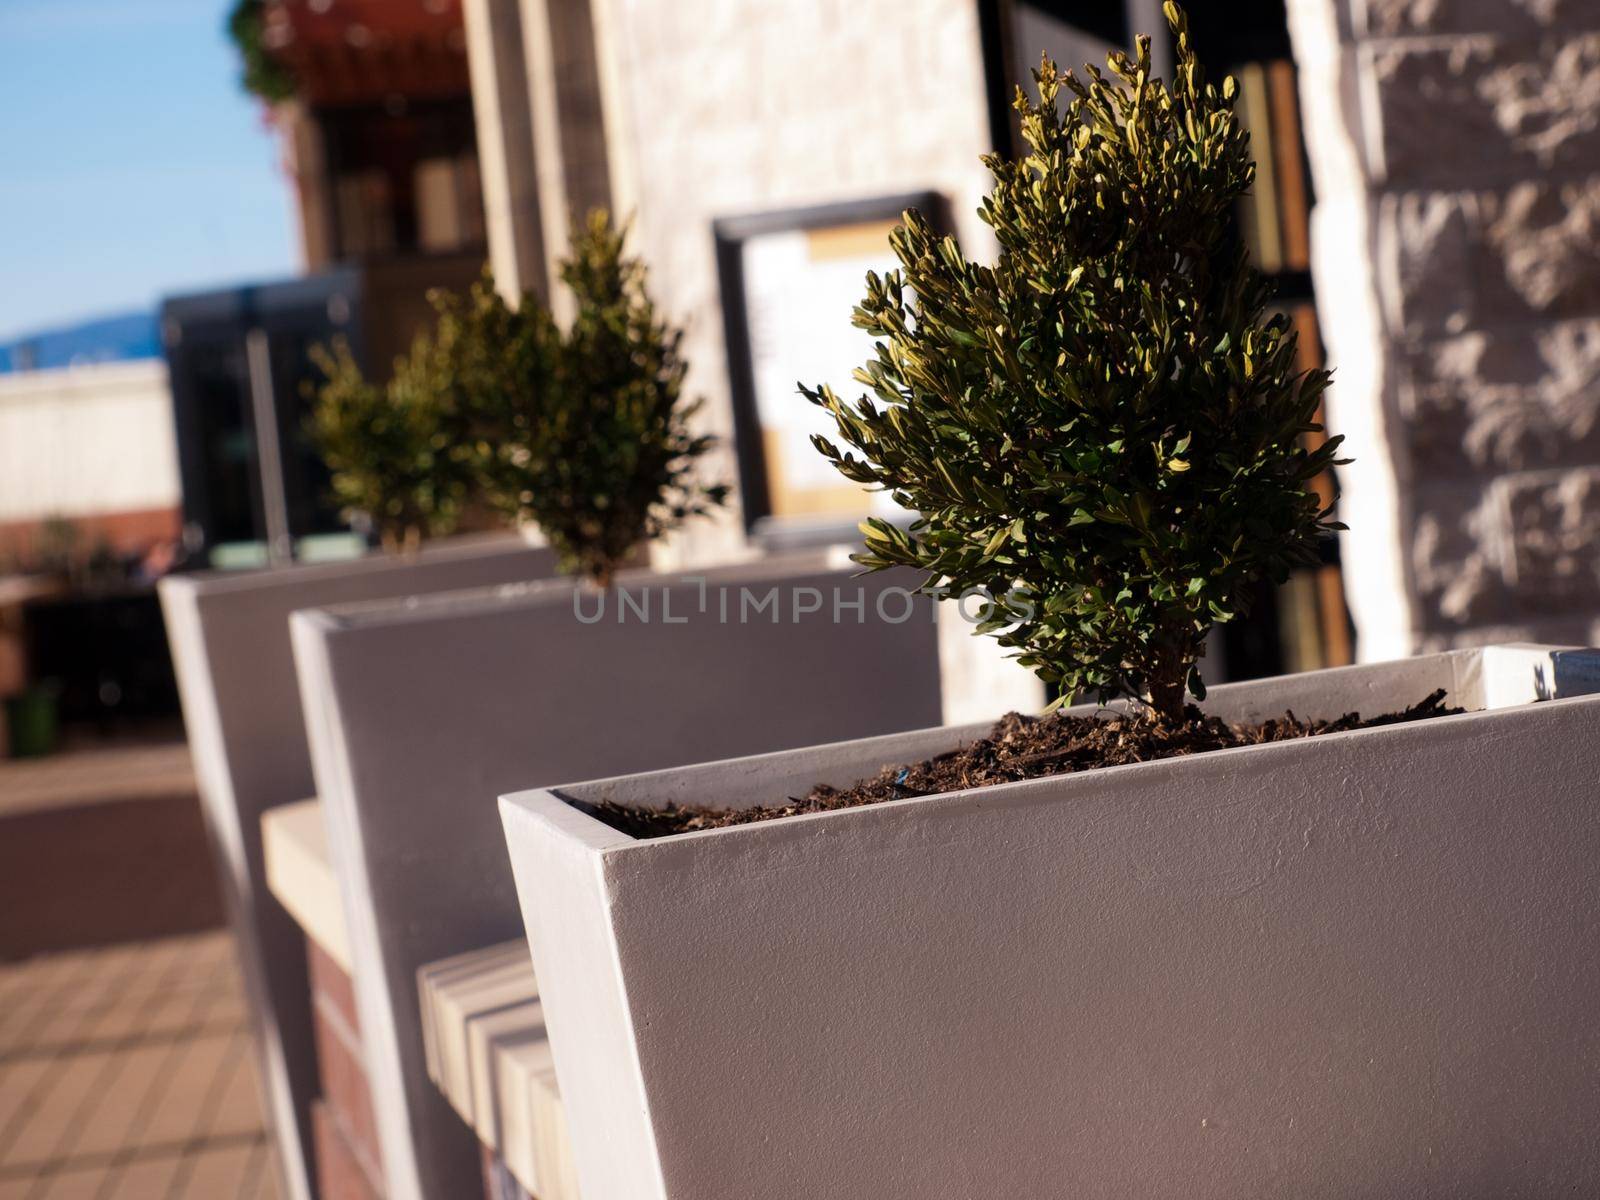 Planters at the mall